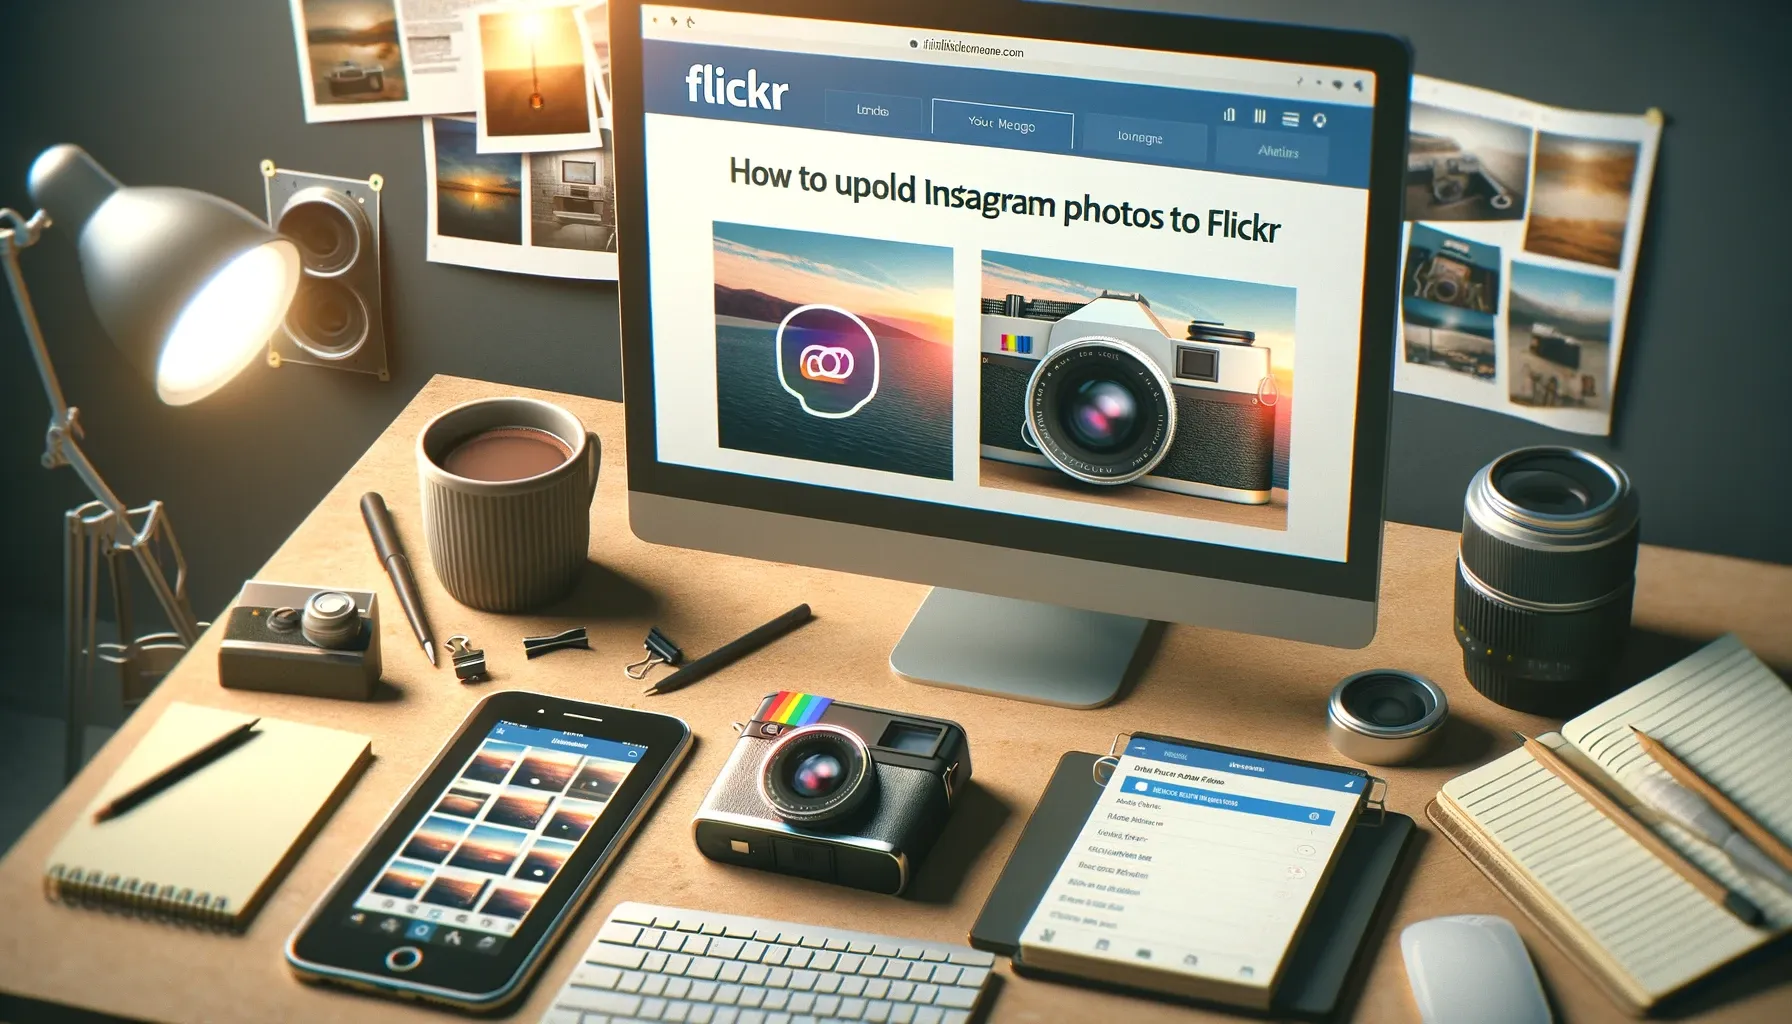 How to upload Instagram photos to Flickr?